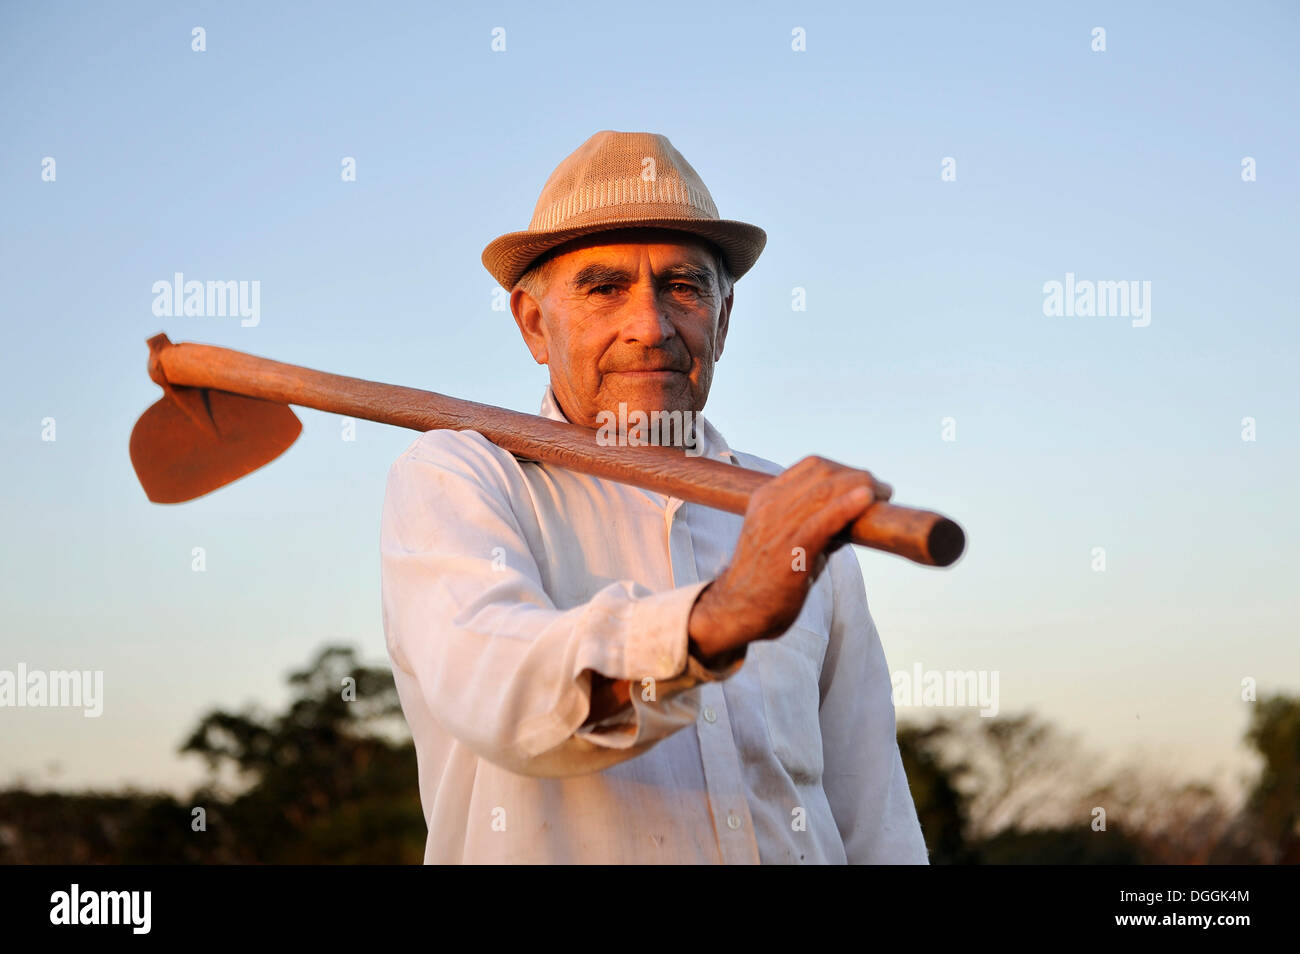 Peasant farmer, 70, holding a hoe, Pastoreo, Caaguazú Department, Paraguay Stock Photo